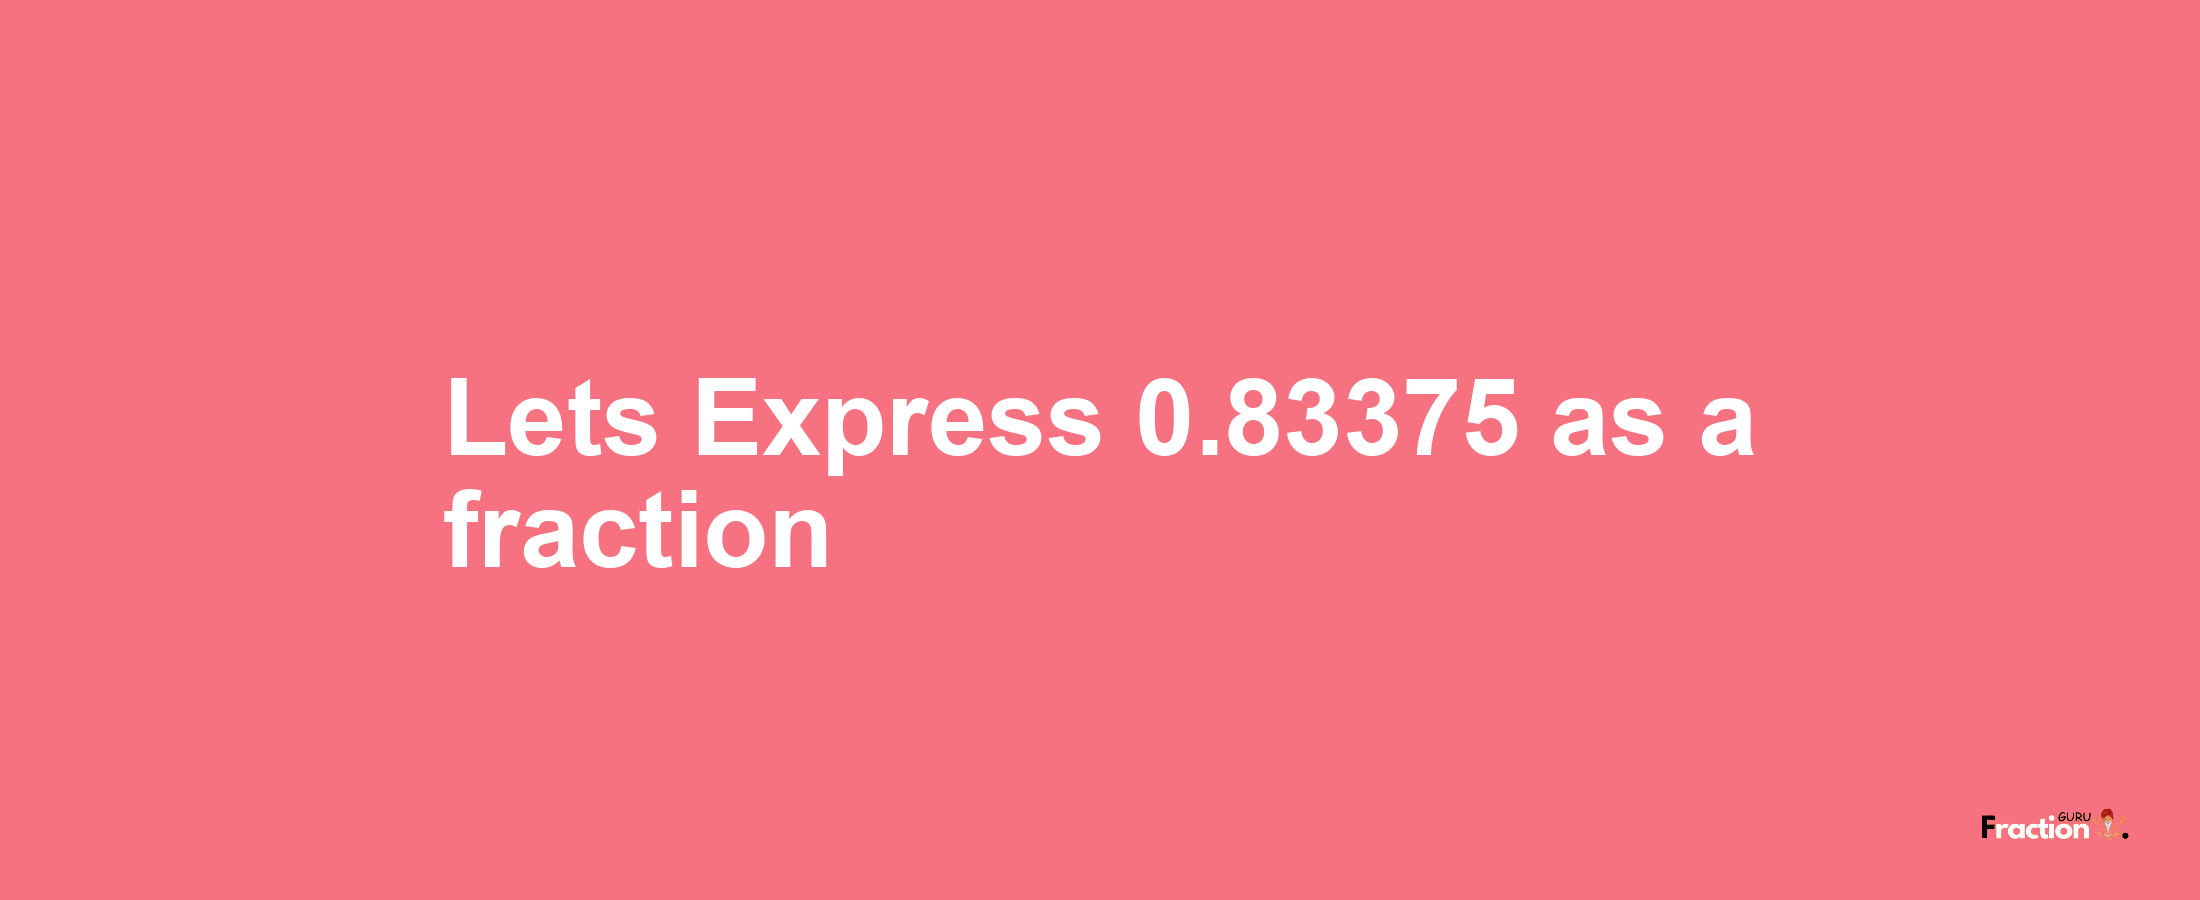 Lets Express 0.83375 as afraction